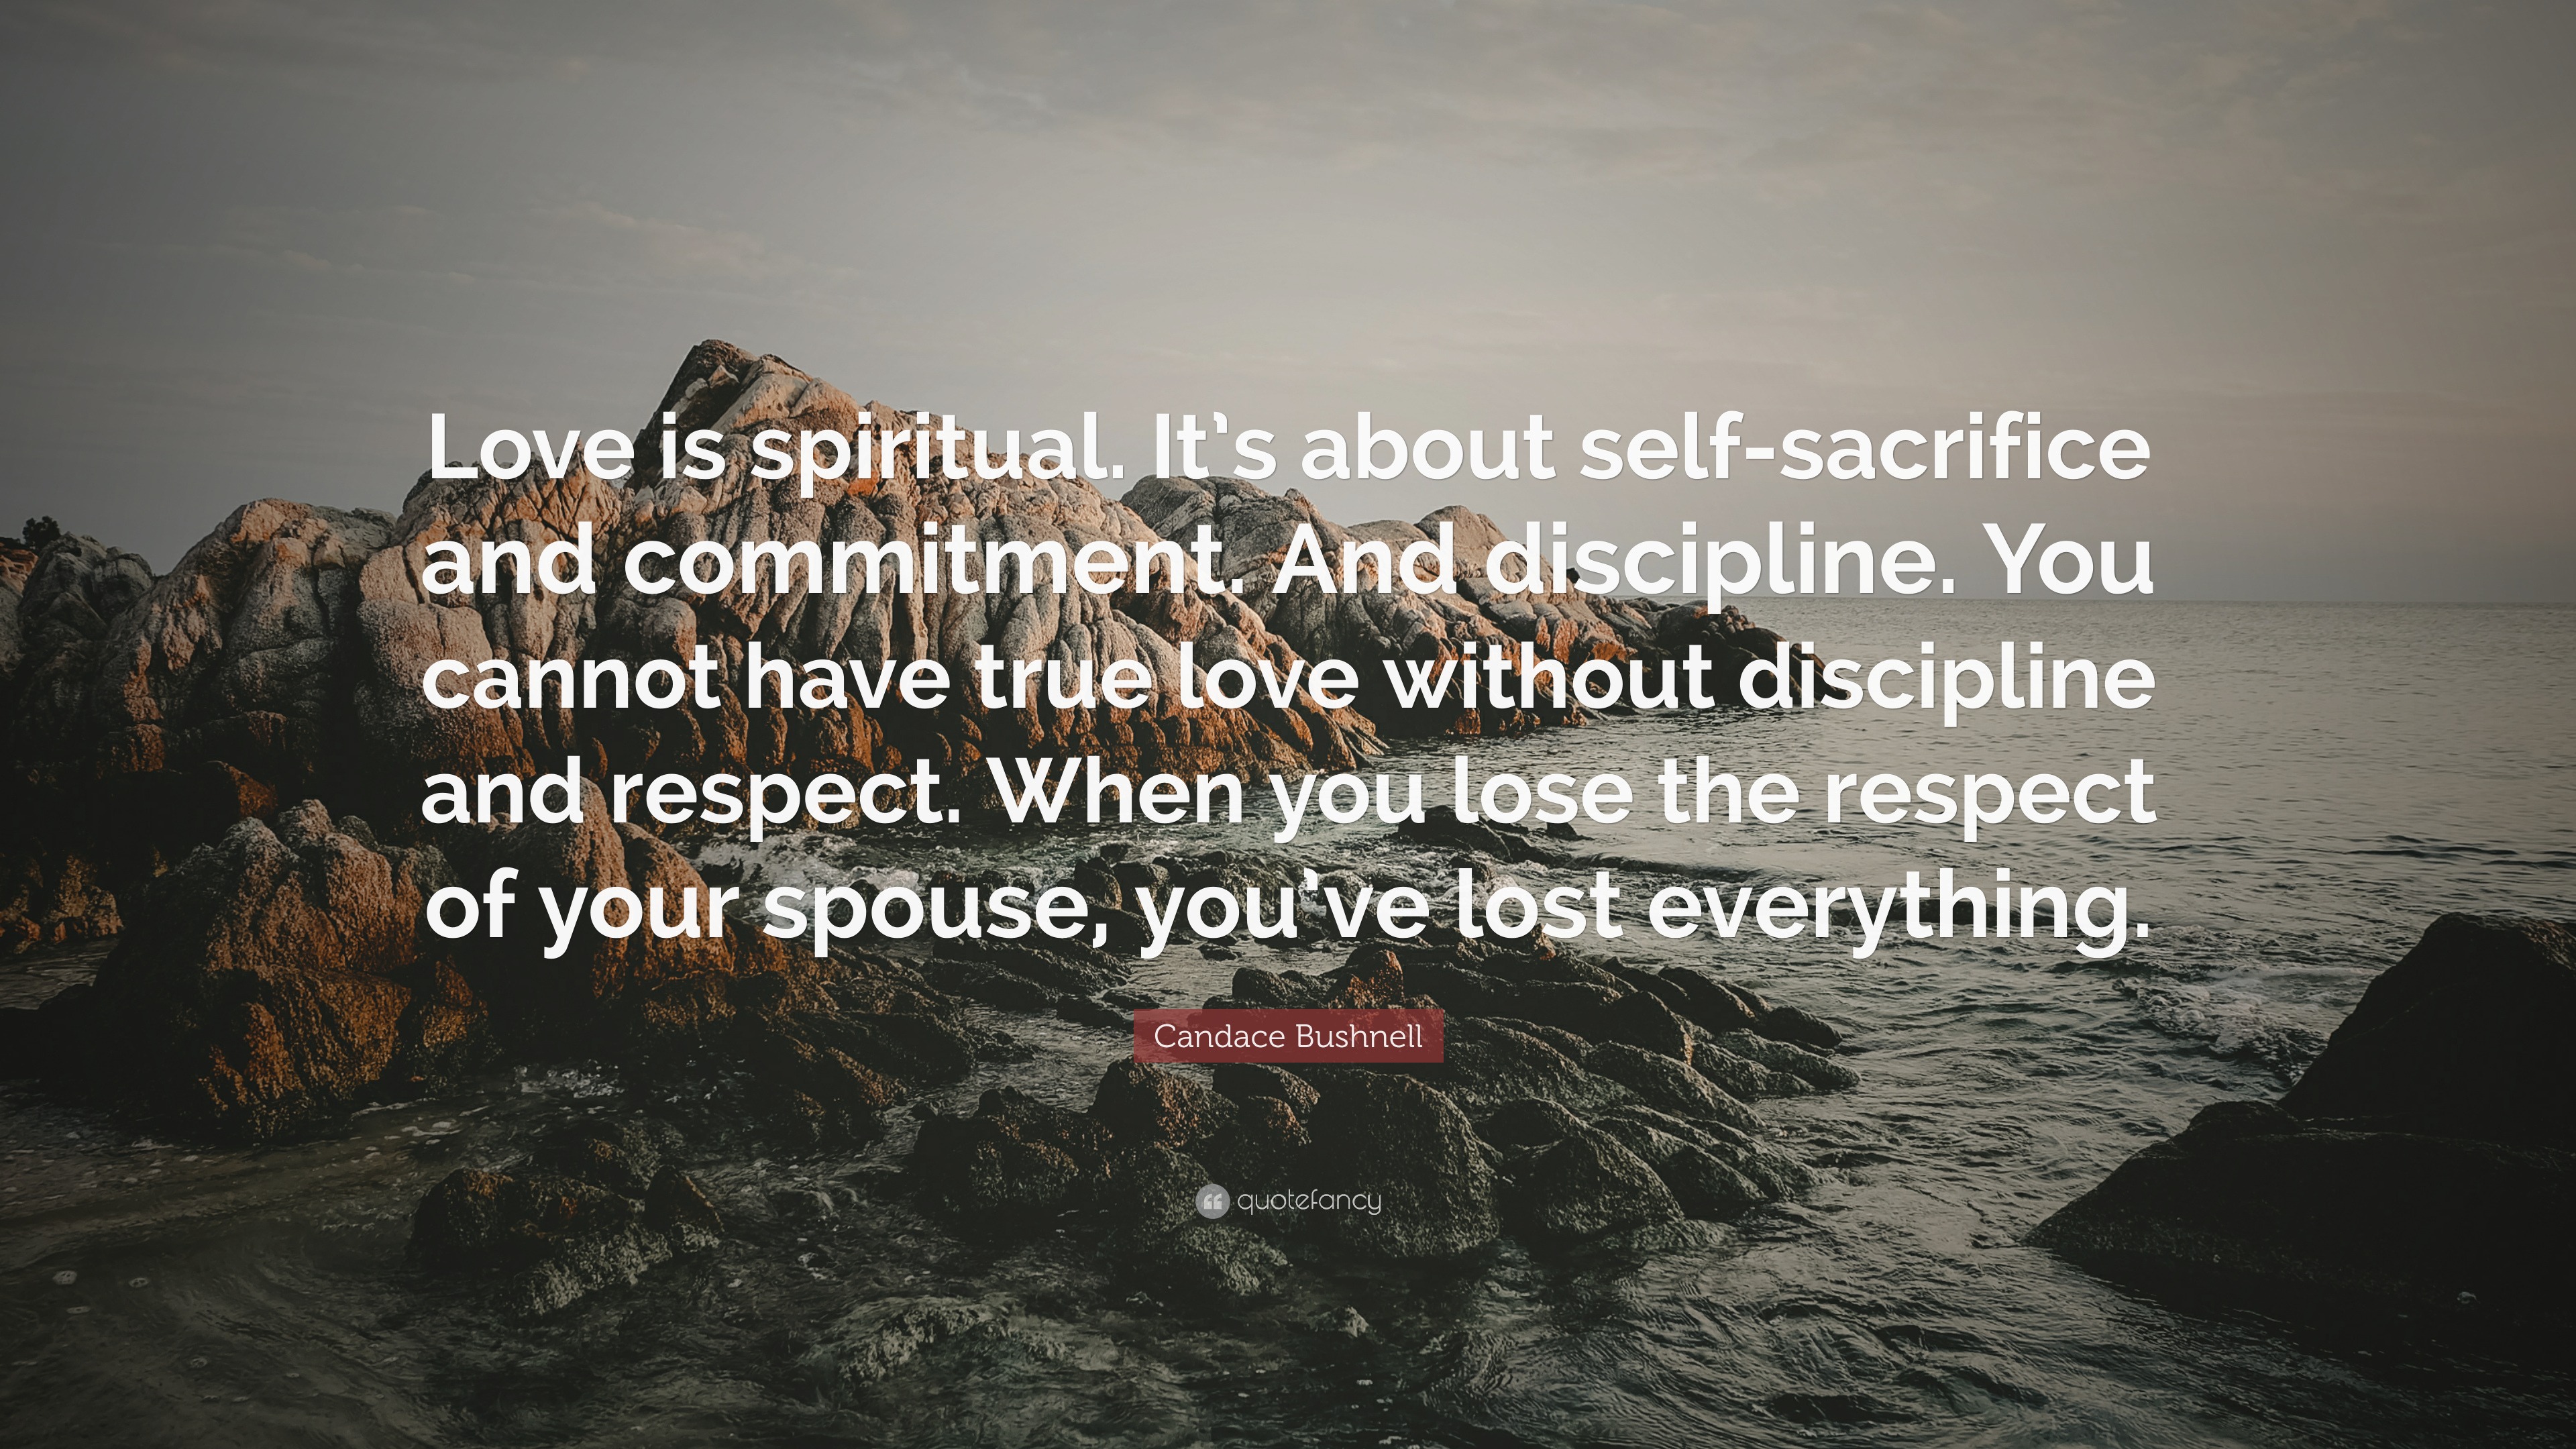 Candace Bushnell Quote “Love is spiritual It s about self sacrifice and mitment